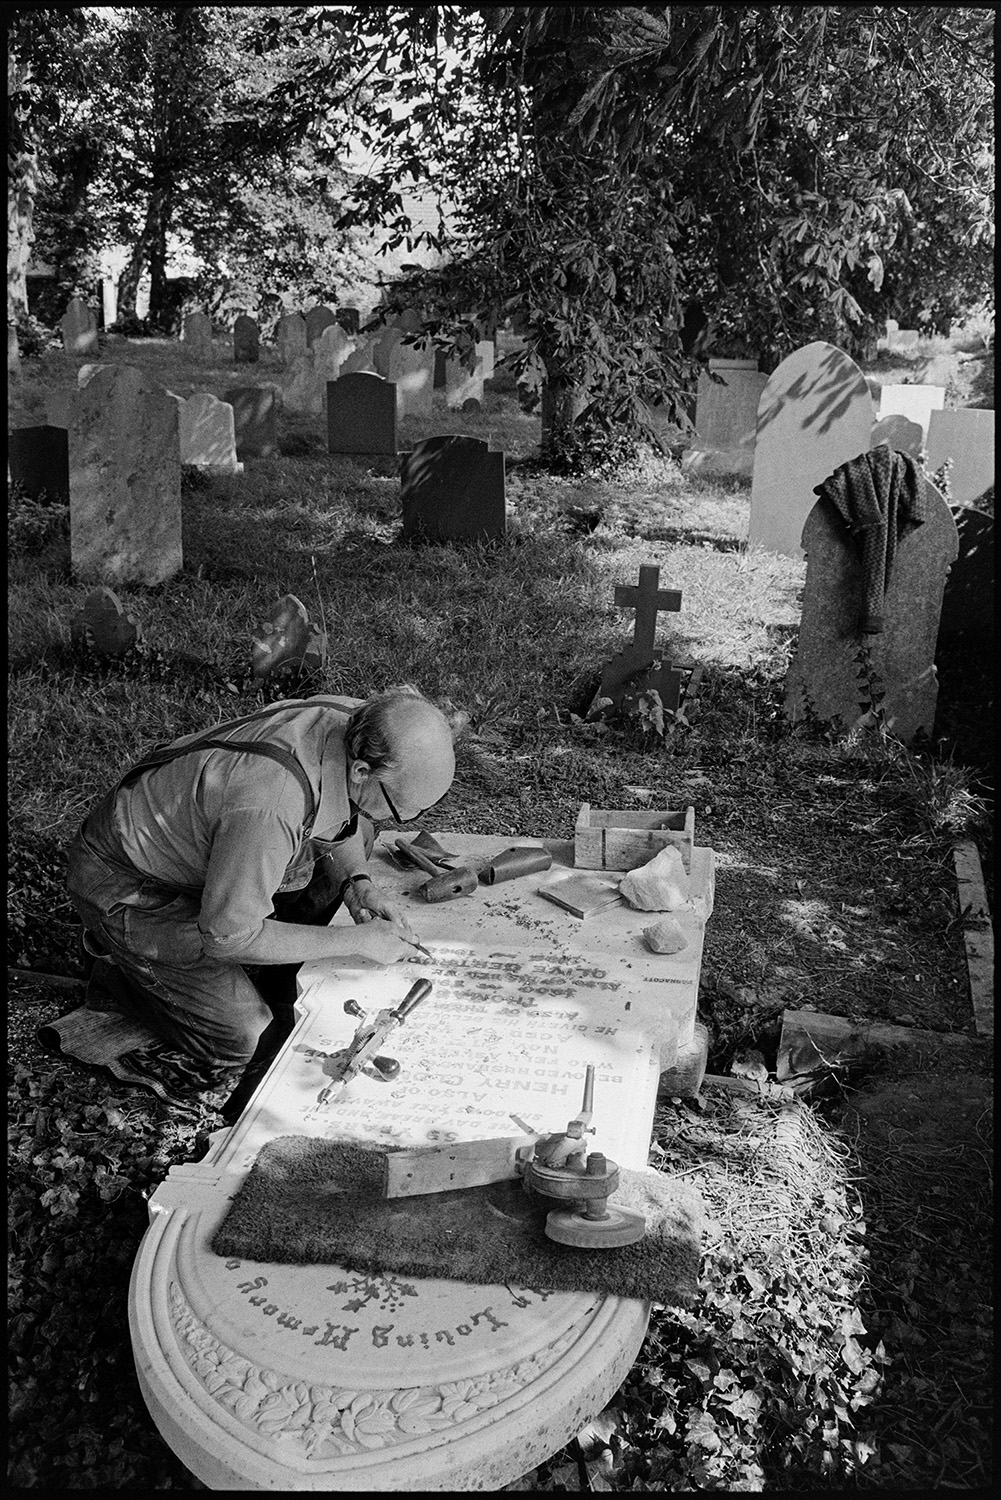 Man working on gravestone, this had been worked by his father and his boss before him. 
[Bruce Edyvean engraving a gravestone in Beaford Churchyard. He is using various tools including a hand drill and a chisel. His father and his father's boss had both worked on the same stone.]